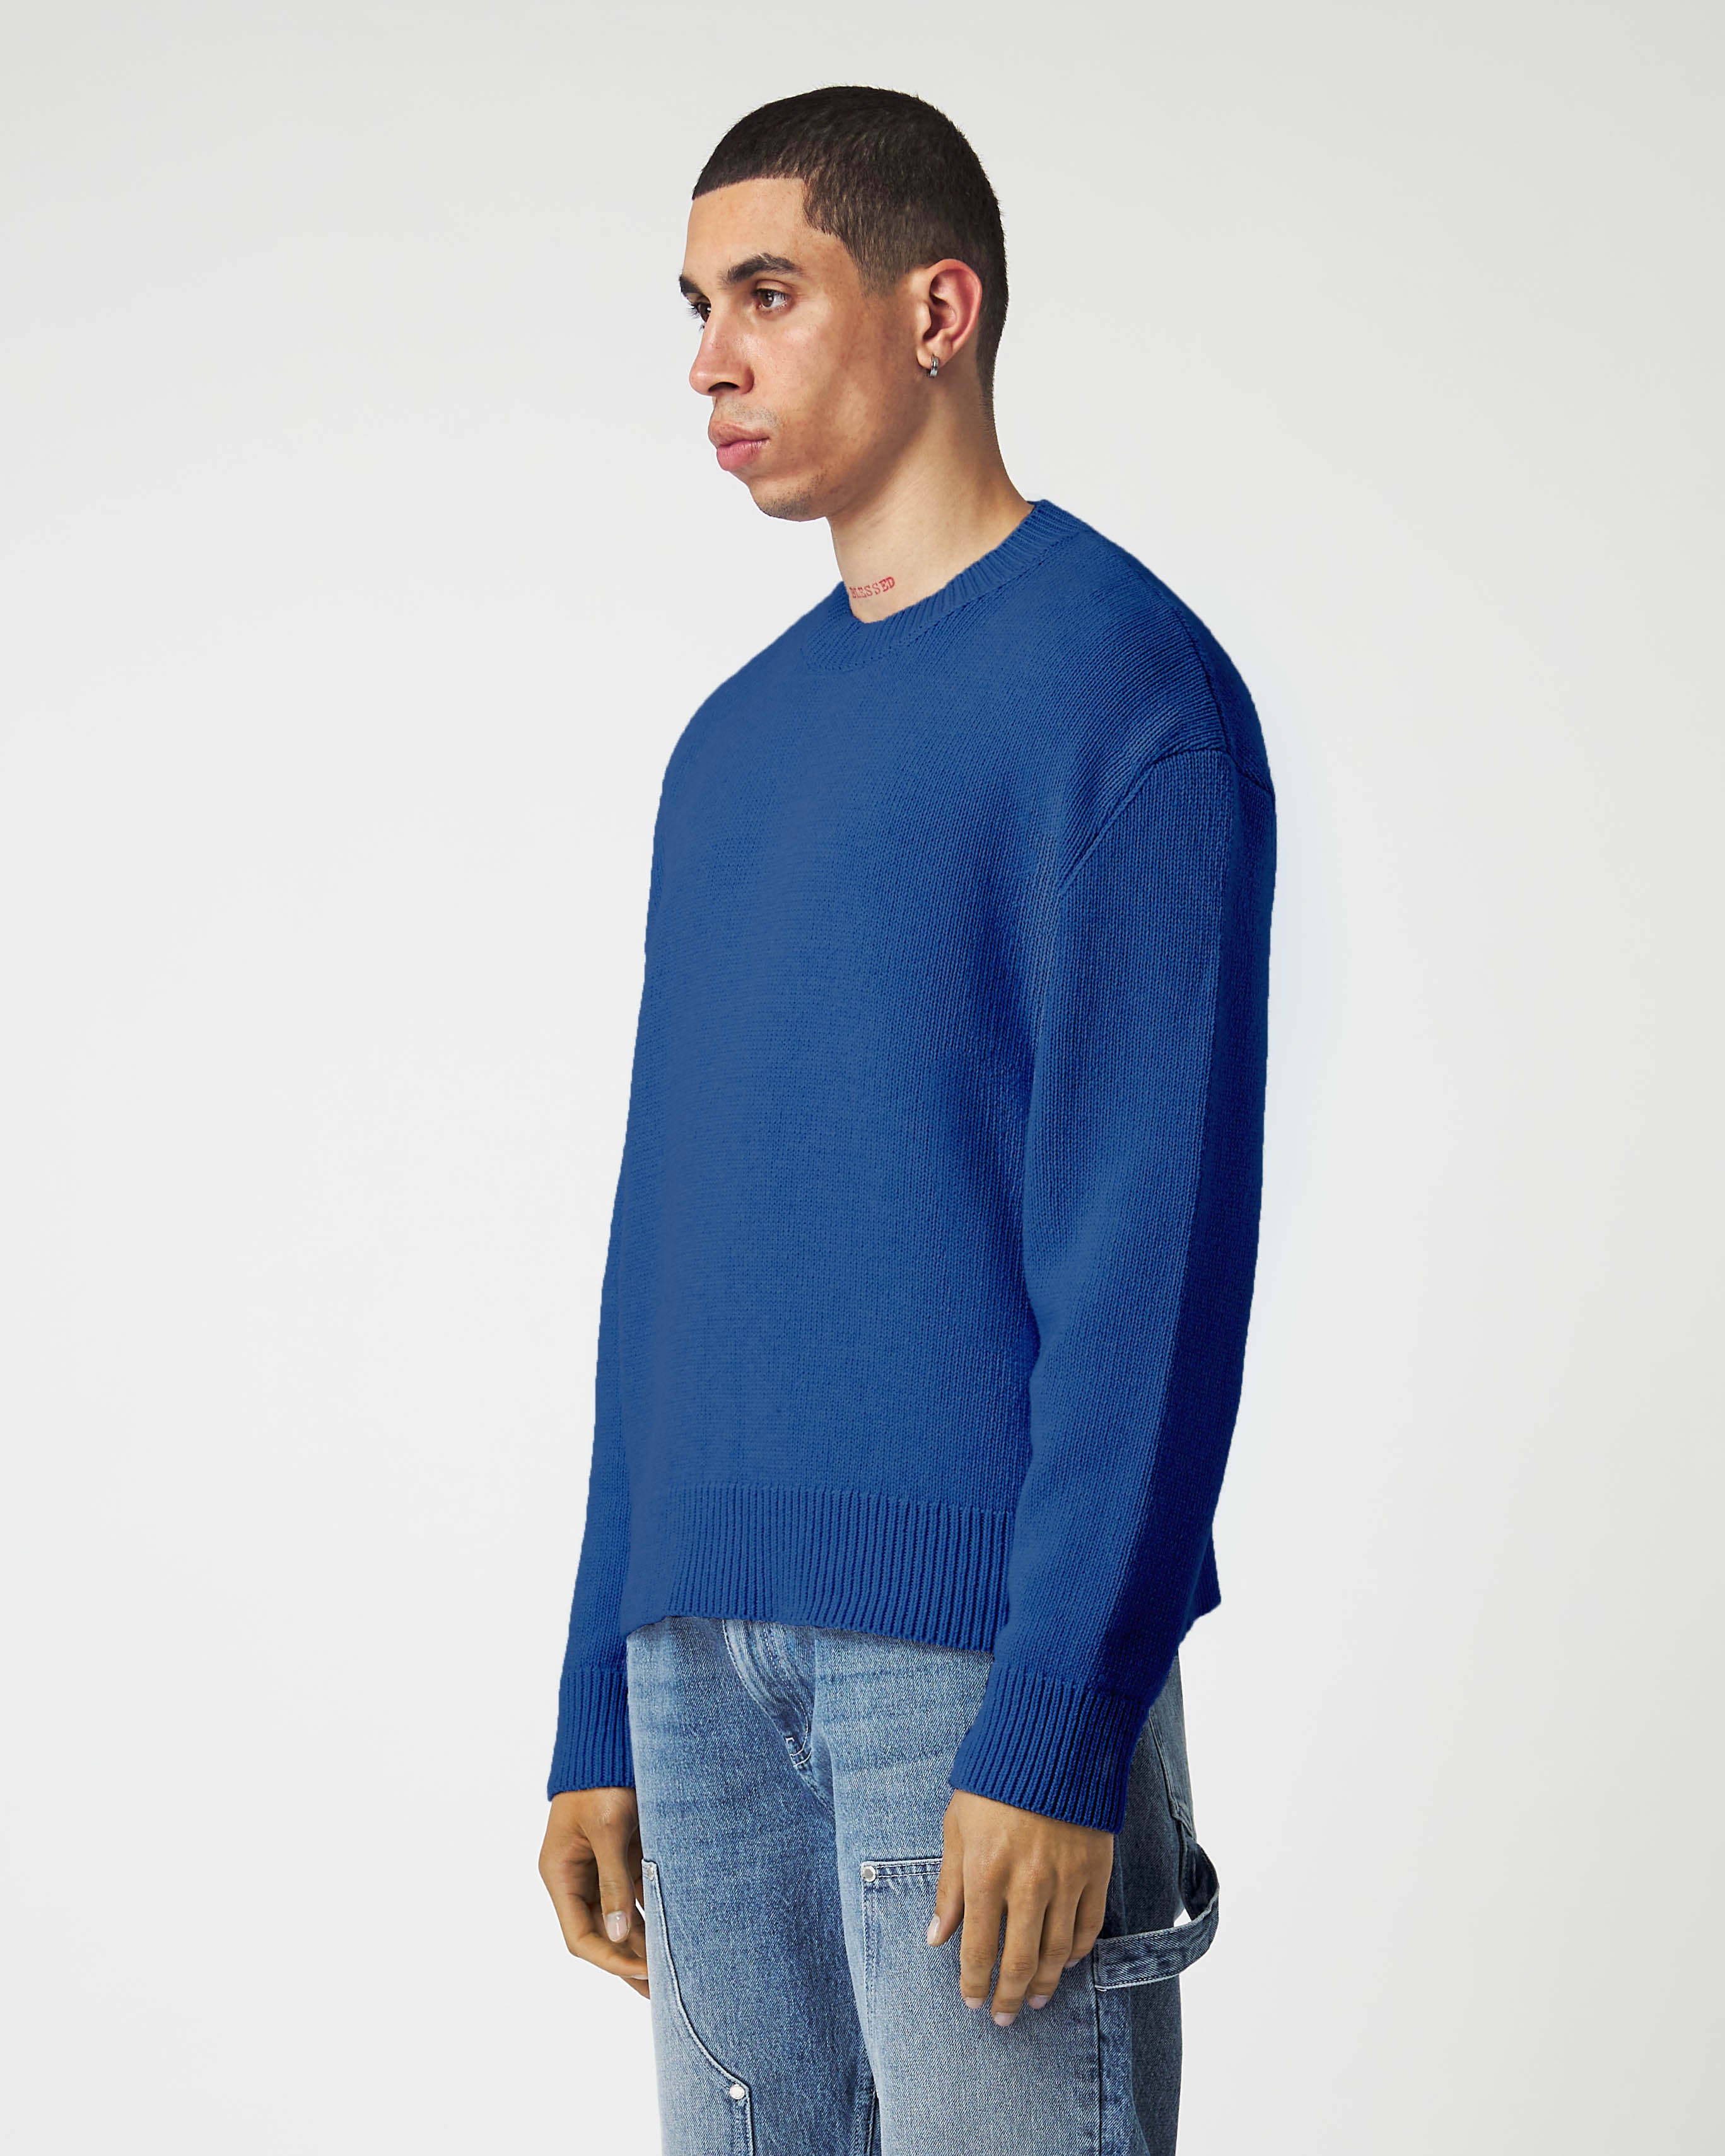 Baby blue knit sweater – eightyfiveclo